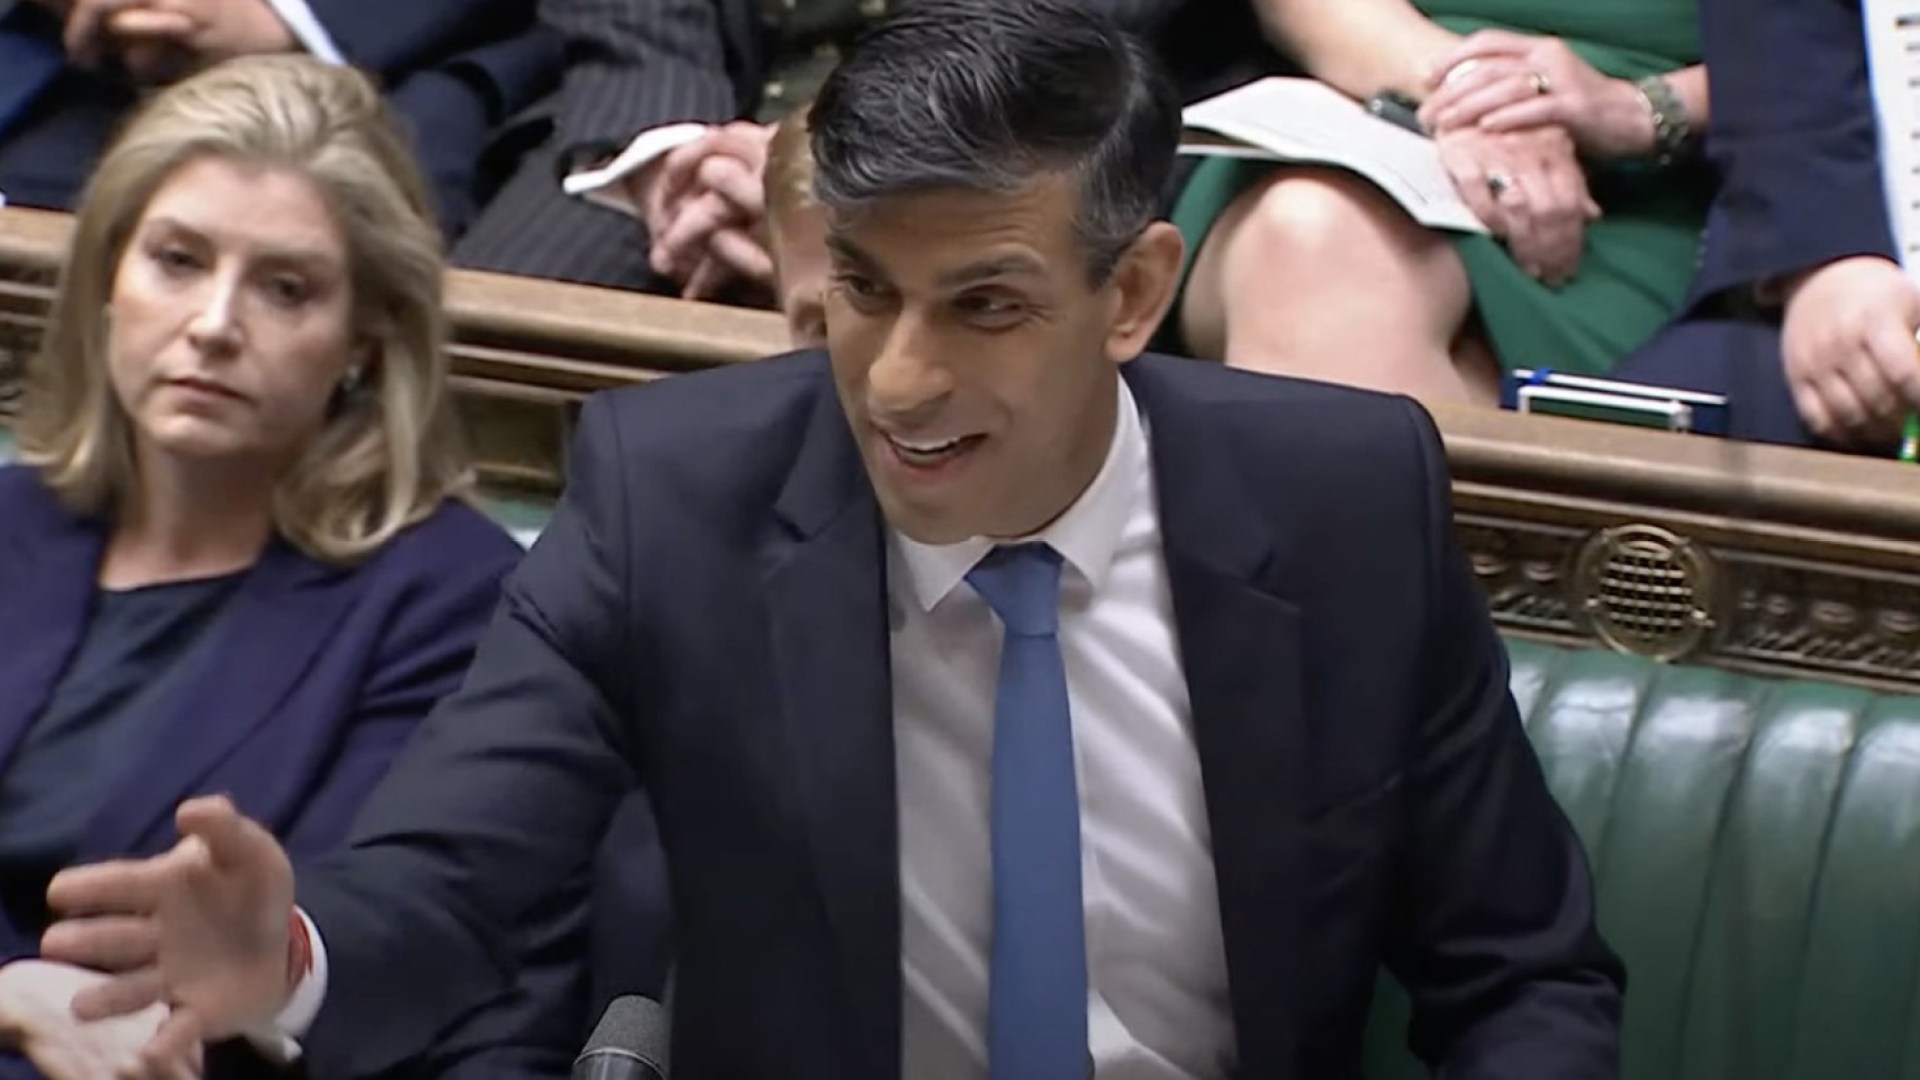 Rishi Sunak takes aim at Keir Starmer over Angela Rayner probe and says Labour leader should ‘read her tax advice’ [Video]